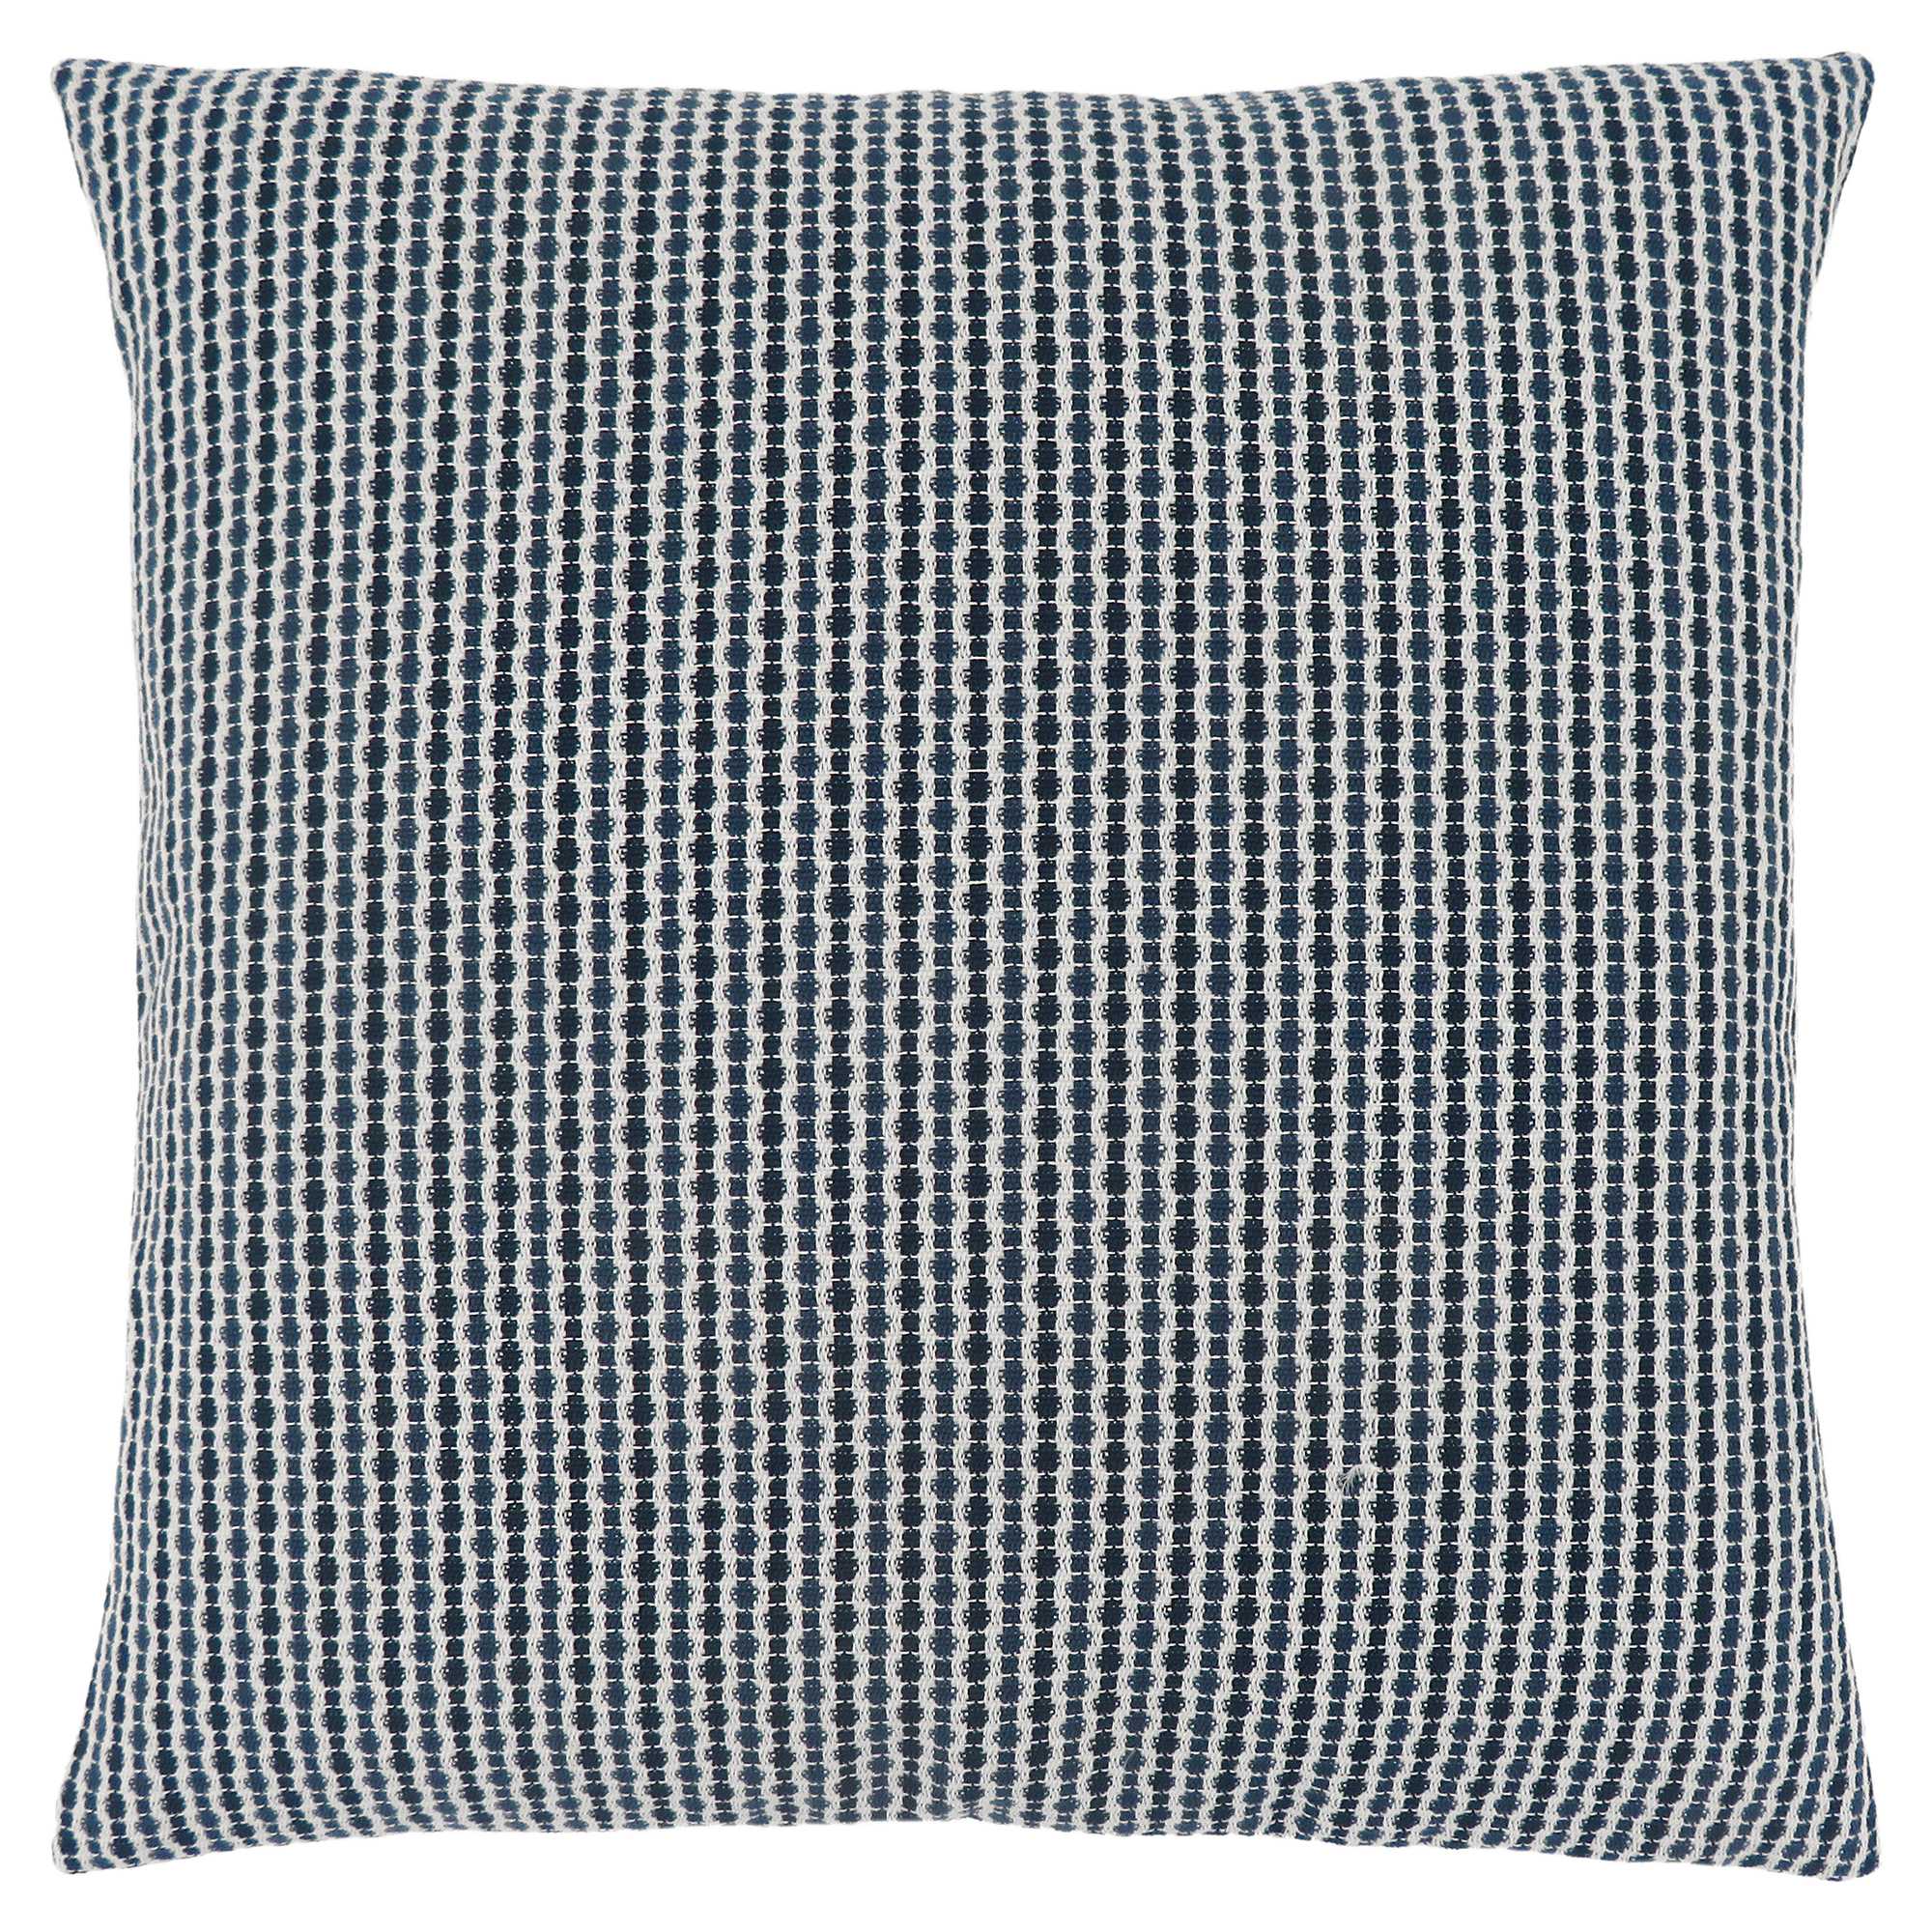 18" X 18" Blue and White Polyester Striped Zippered Pillow-344023-1